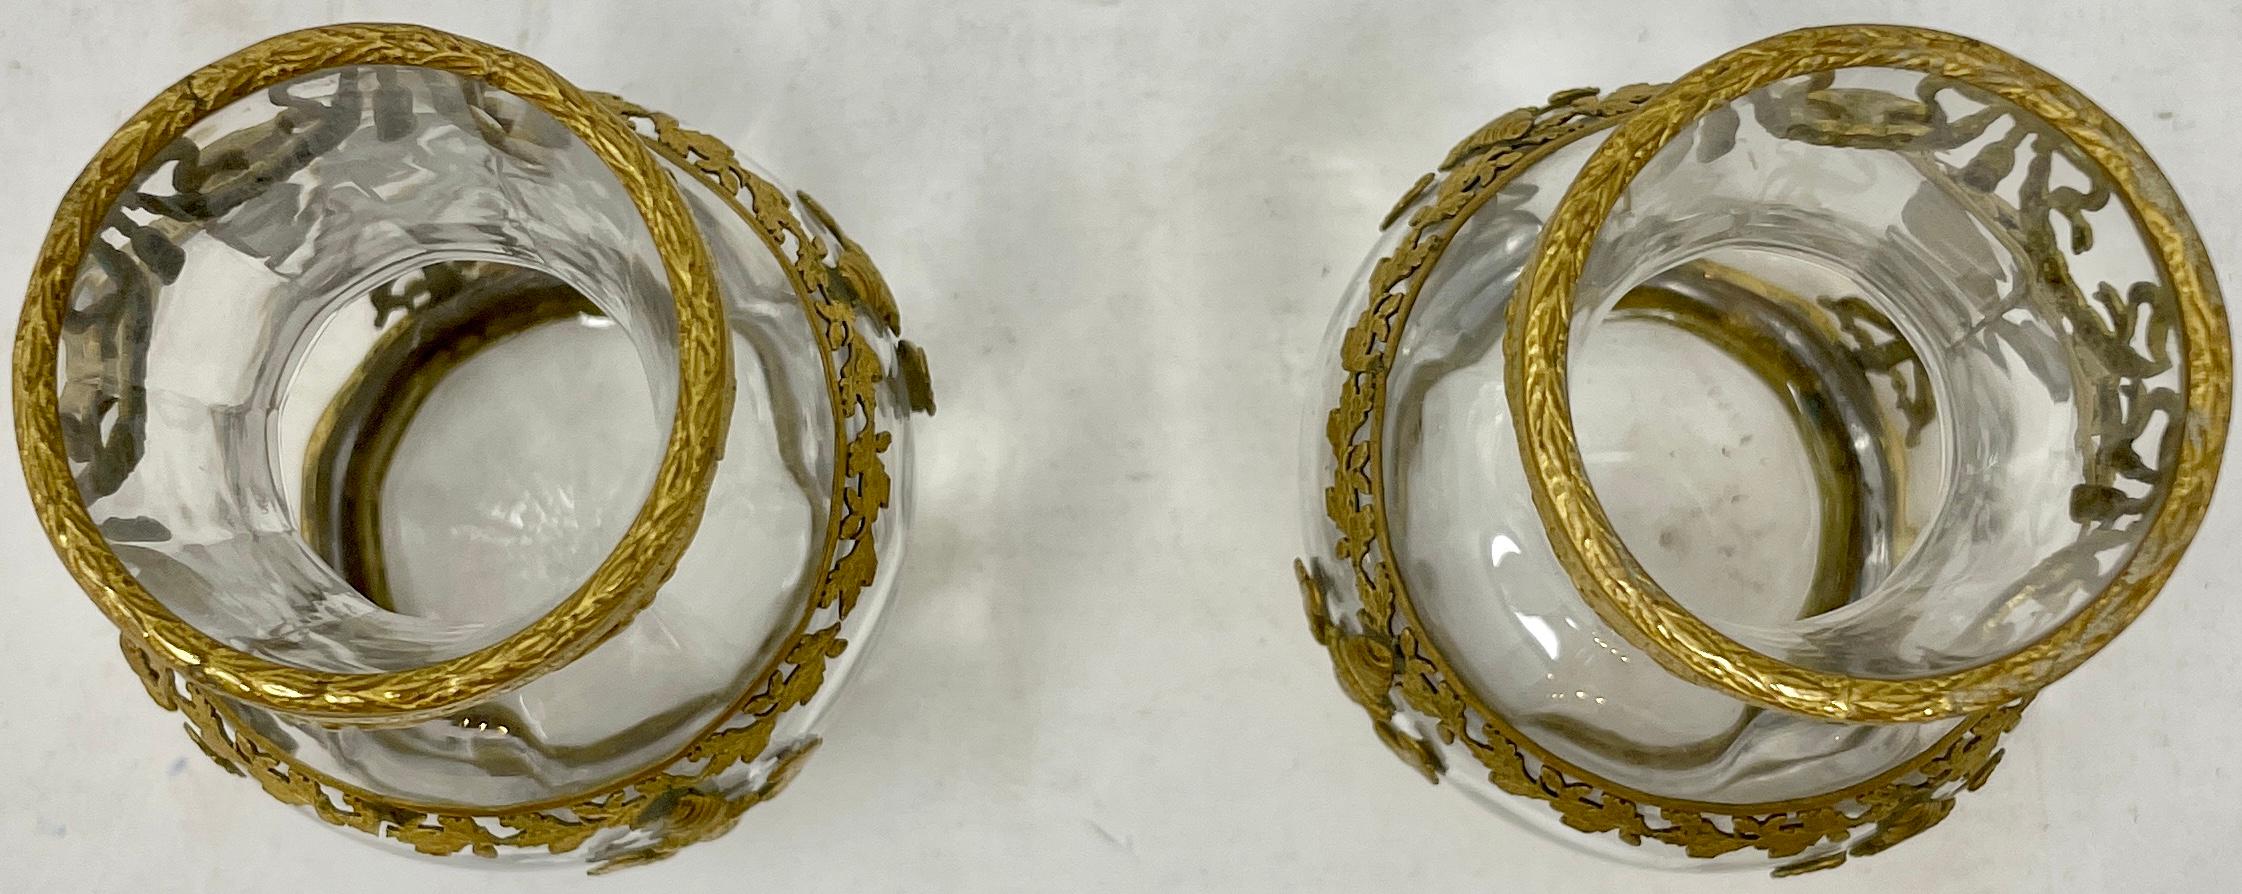 20th Century Pair Antique French Neoclassical Bronze D'ore Mounted Crystal Vases, Circa, 1900